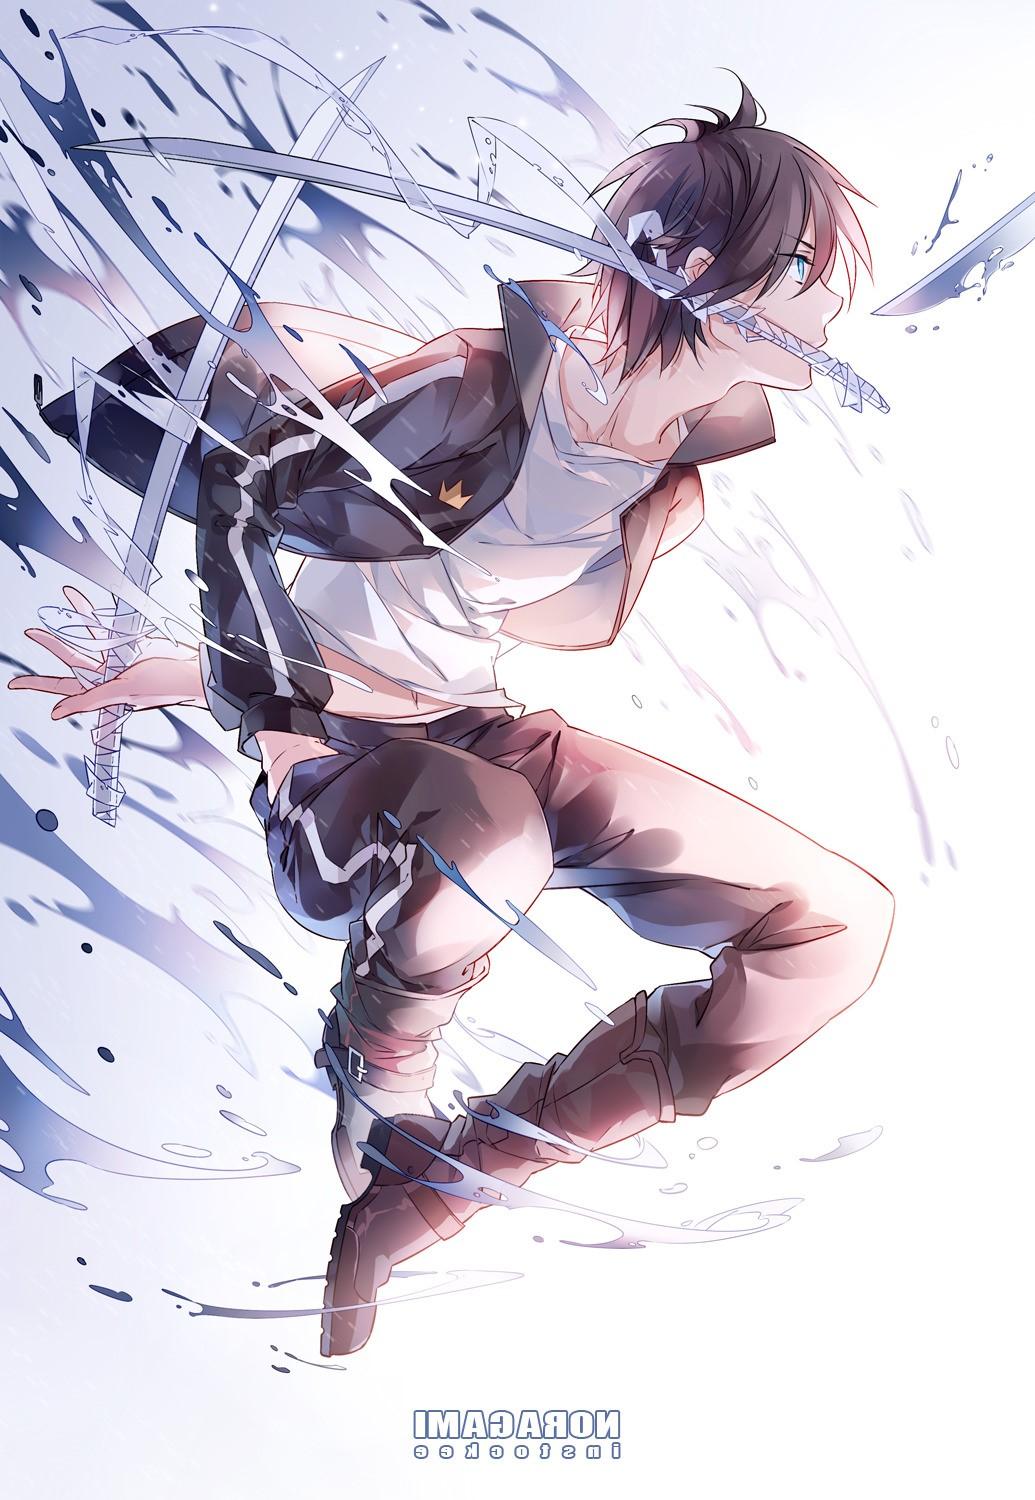 Anime Boy With Brown Hair And Sword 5091